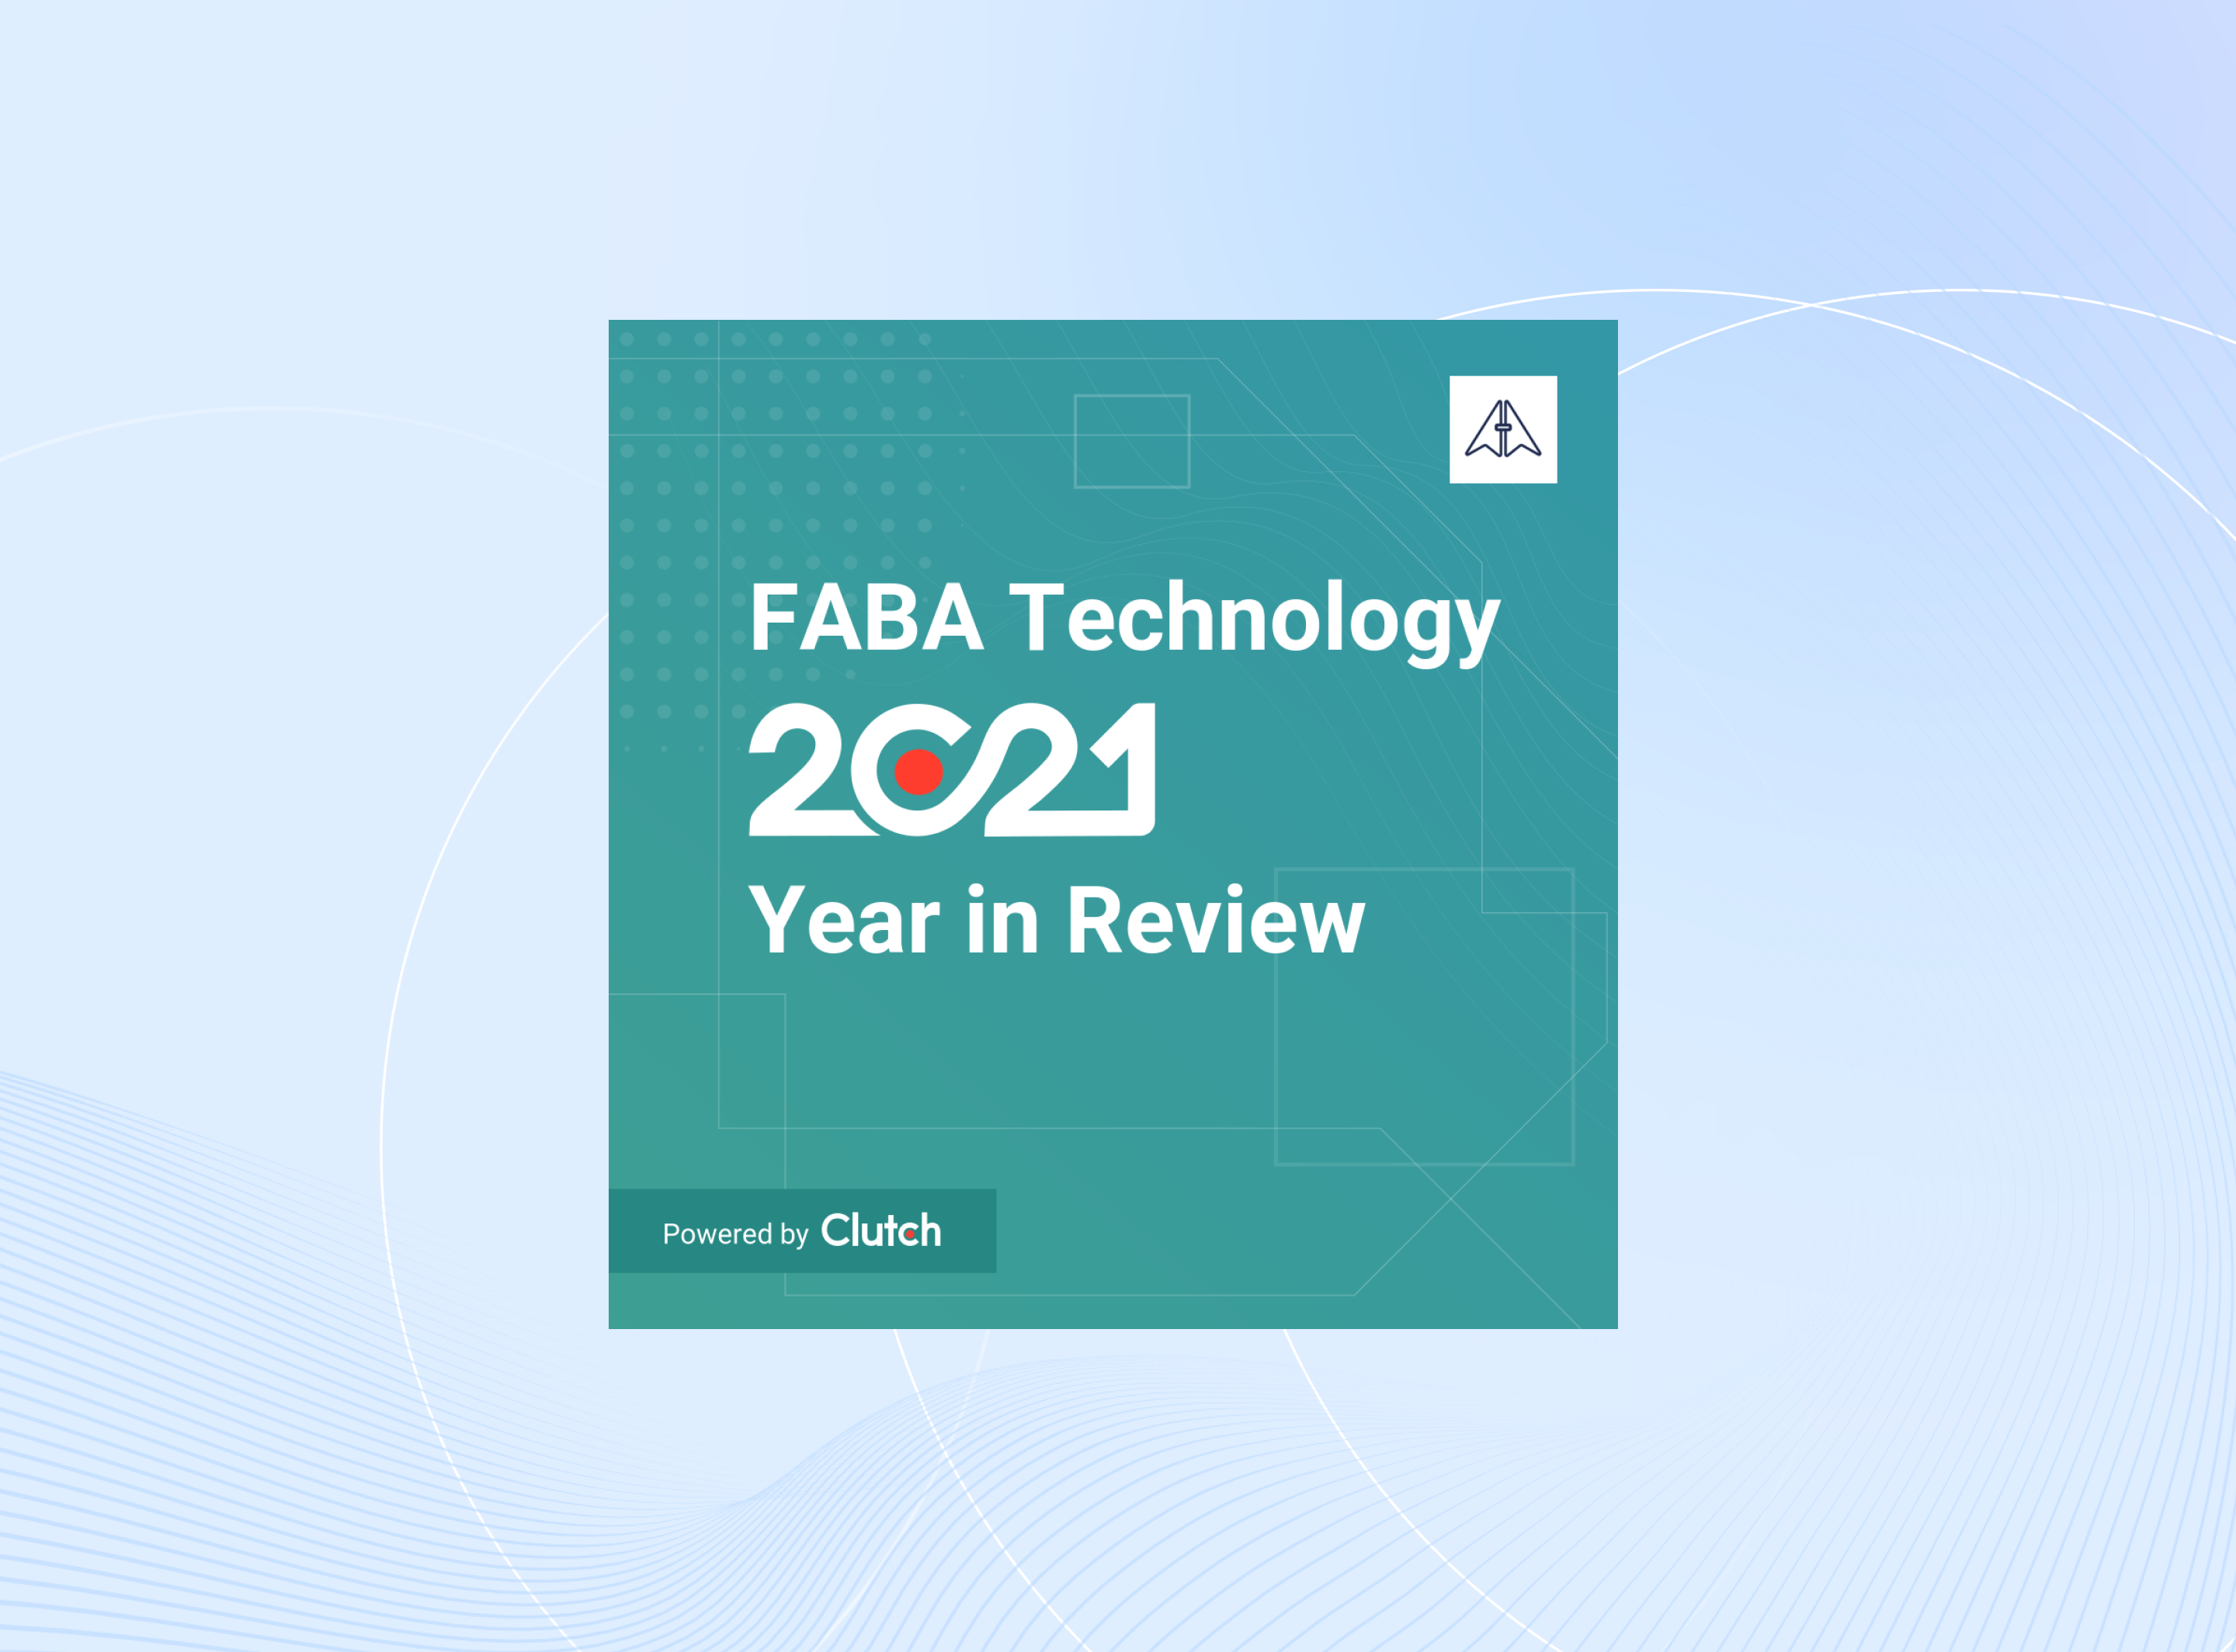 FABA Technology Records A Perfect Review Rating To Close 2021